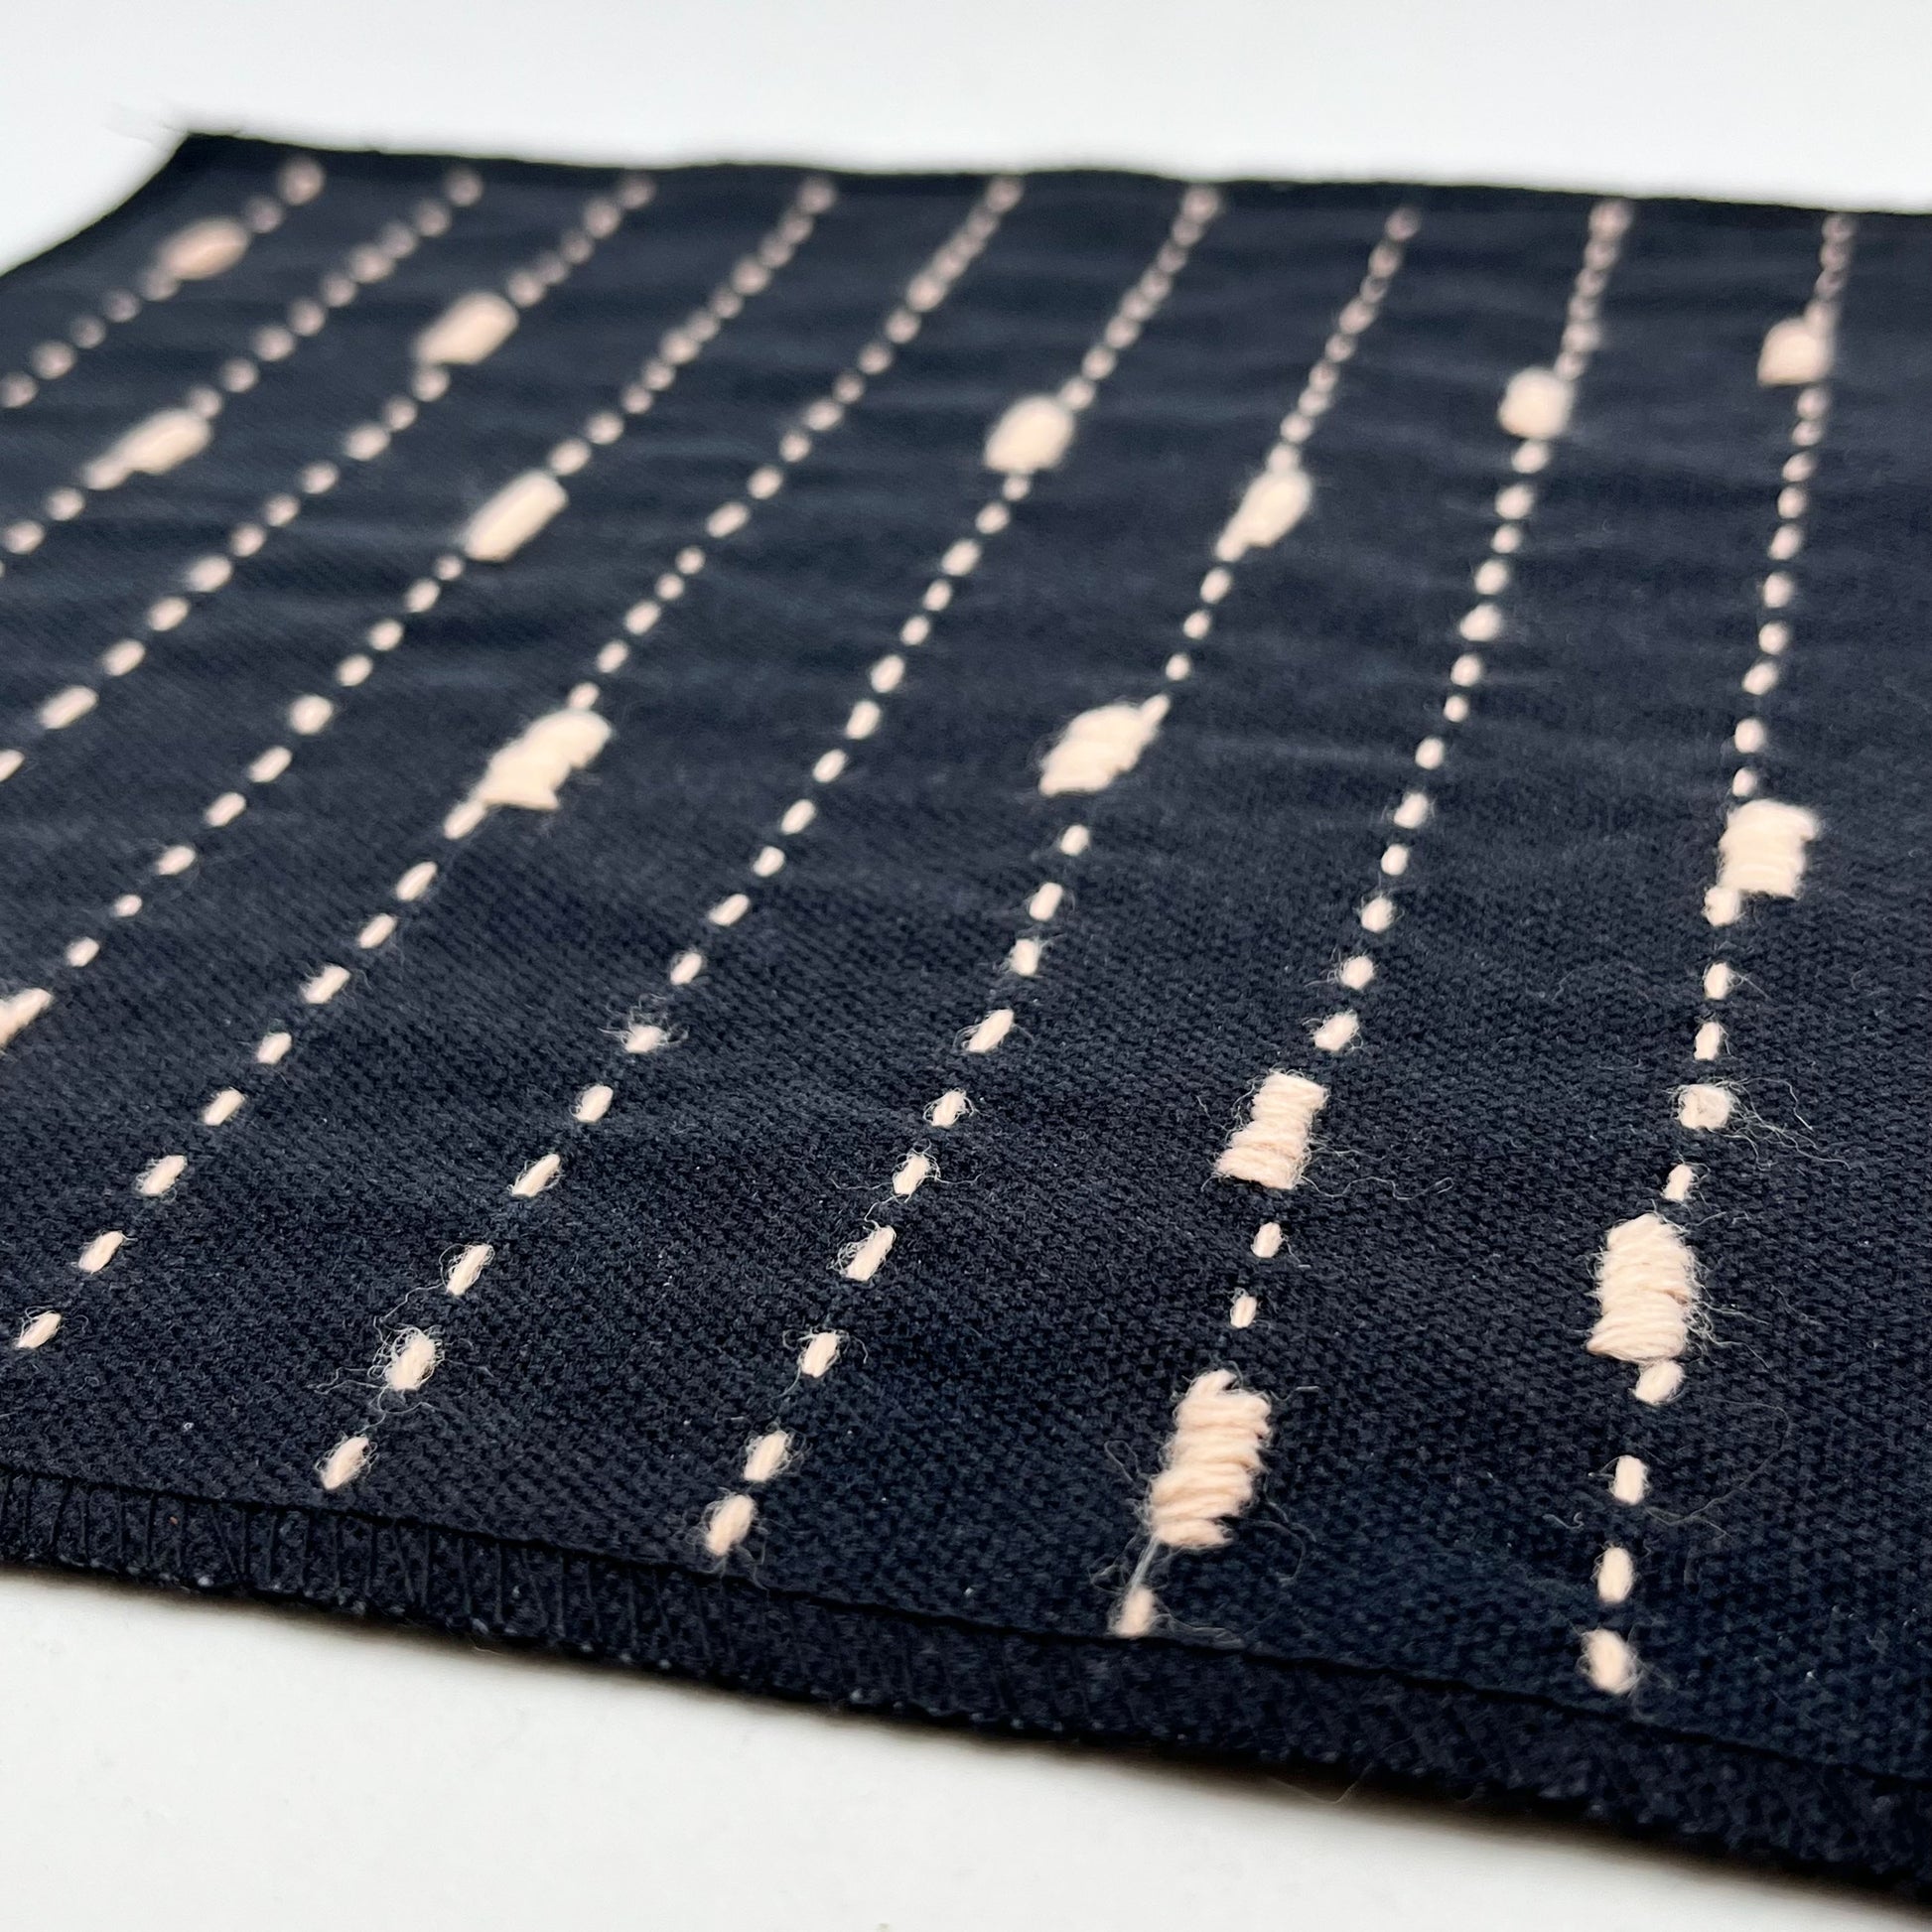 a close up angled view of a square patch made out of black canvas, handstitched with peach running stitches with randomly placed small rectangles made of stitches running the other direction, with overlocked edges, on a white background